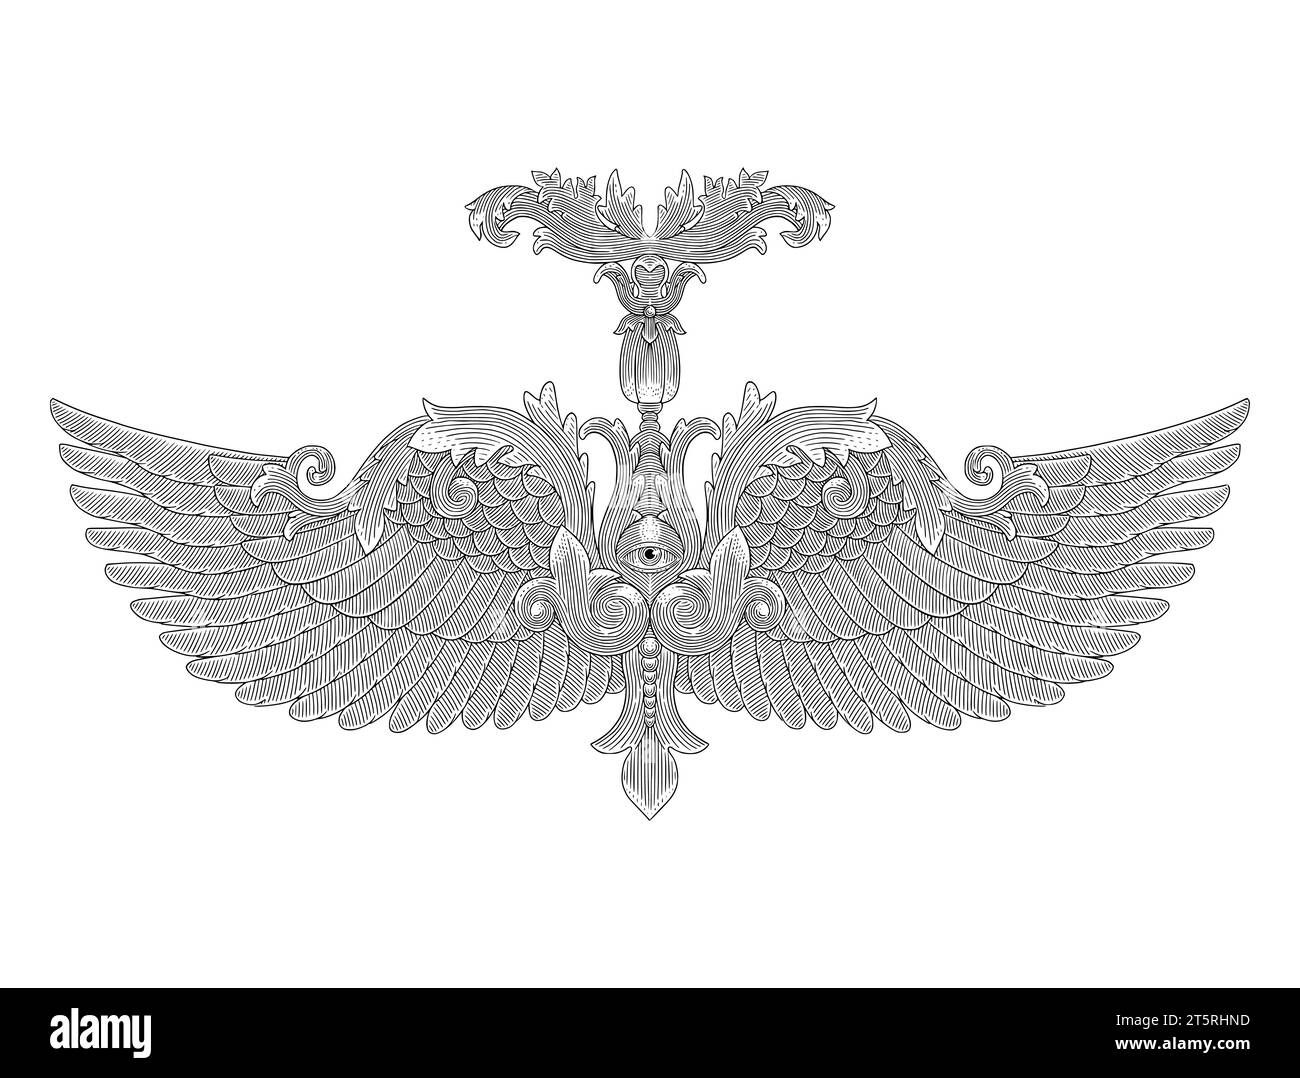 One eye angel, Hand drawing vintage engraving style illustration Stock Vector